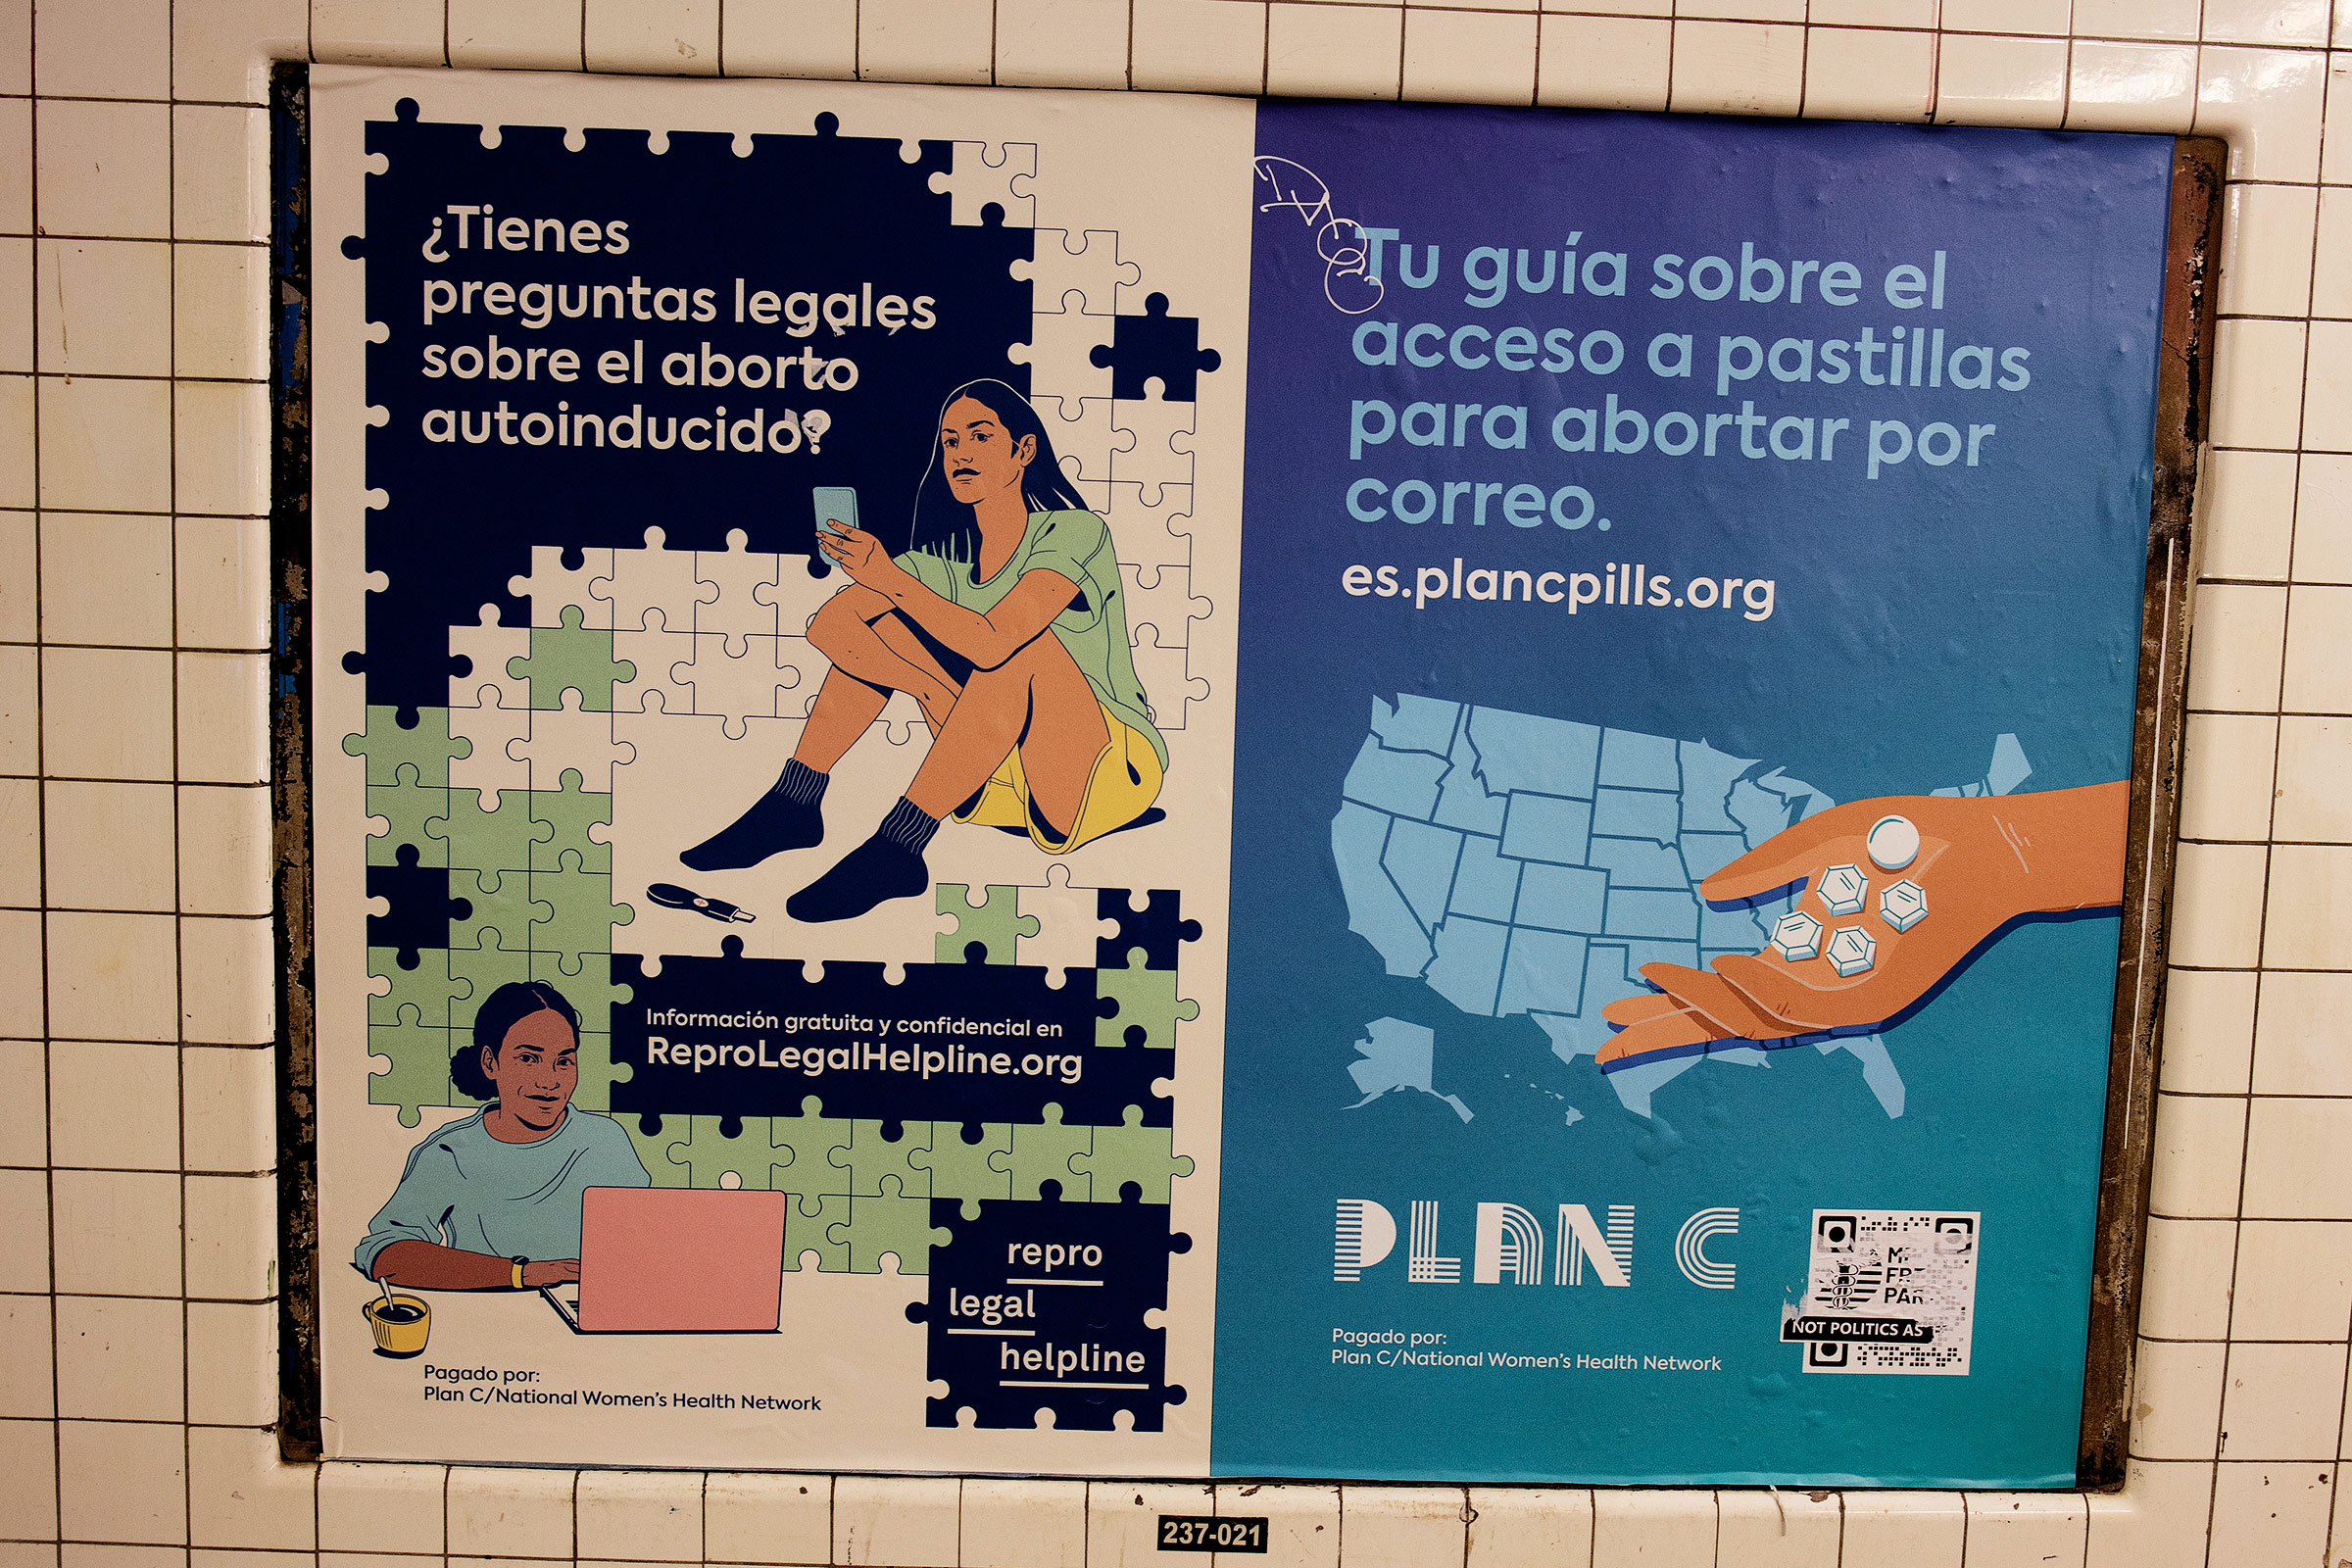 A Plan C subway ad in Spanish offers medical advice on abortion pills, May 7, 2022 in Brooklyn, New York. (Andrew Lichtenstein—Corbis/Getty Images)